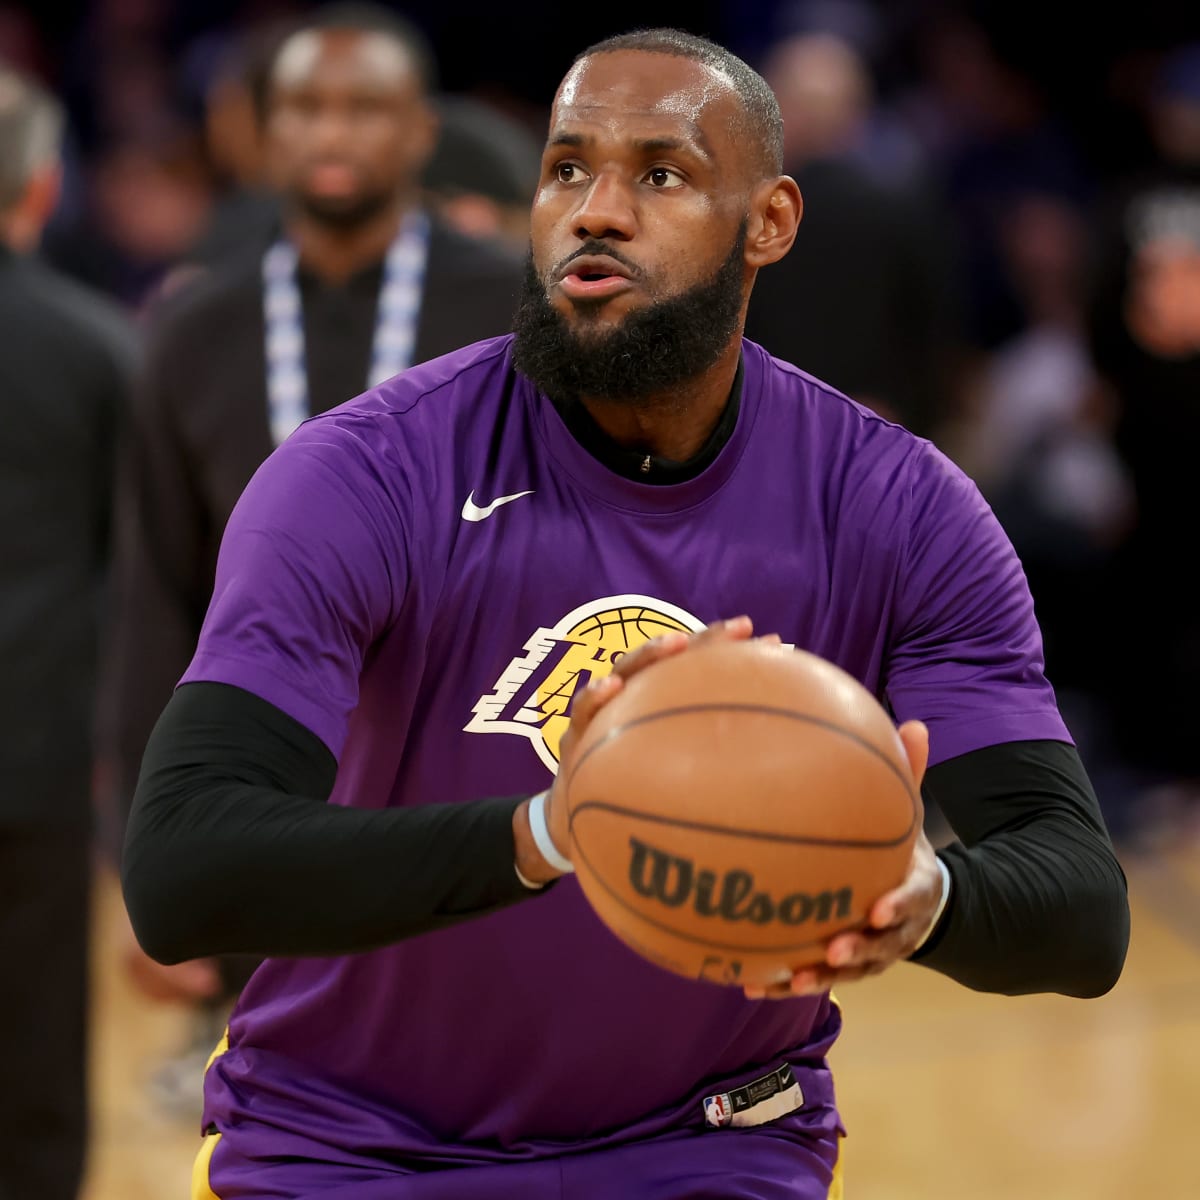 Lakers ticket prices soar as LeBron James approaches NBA scoring